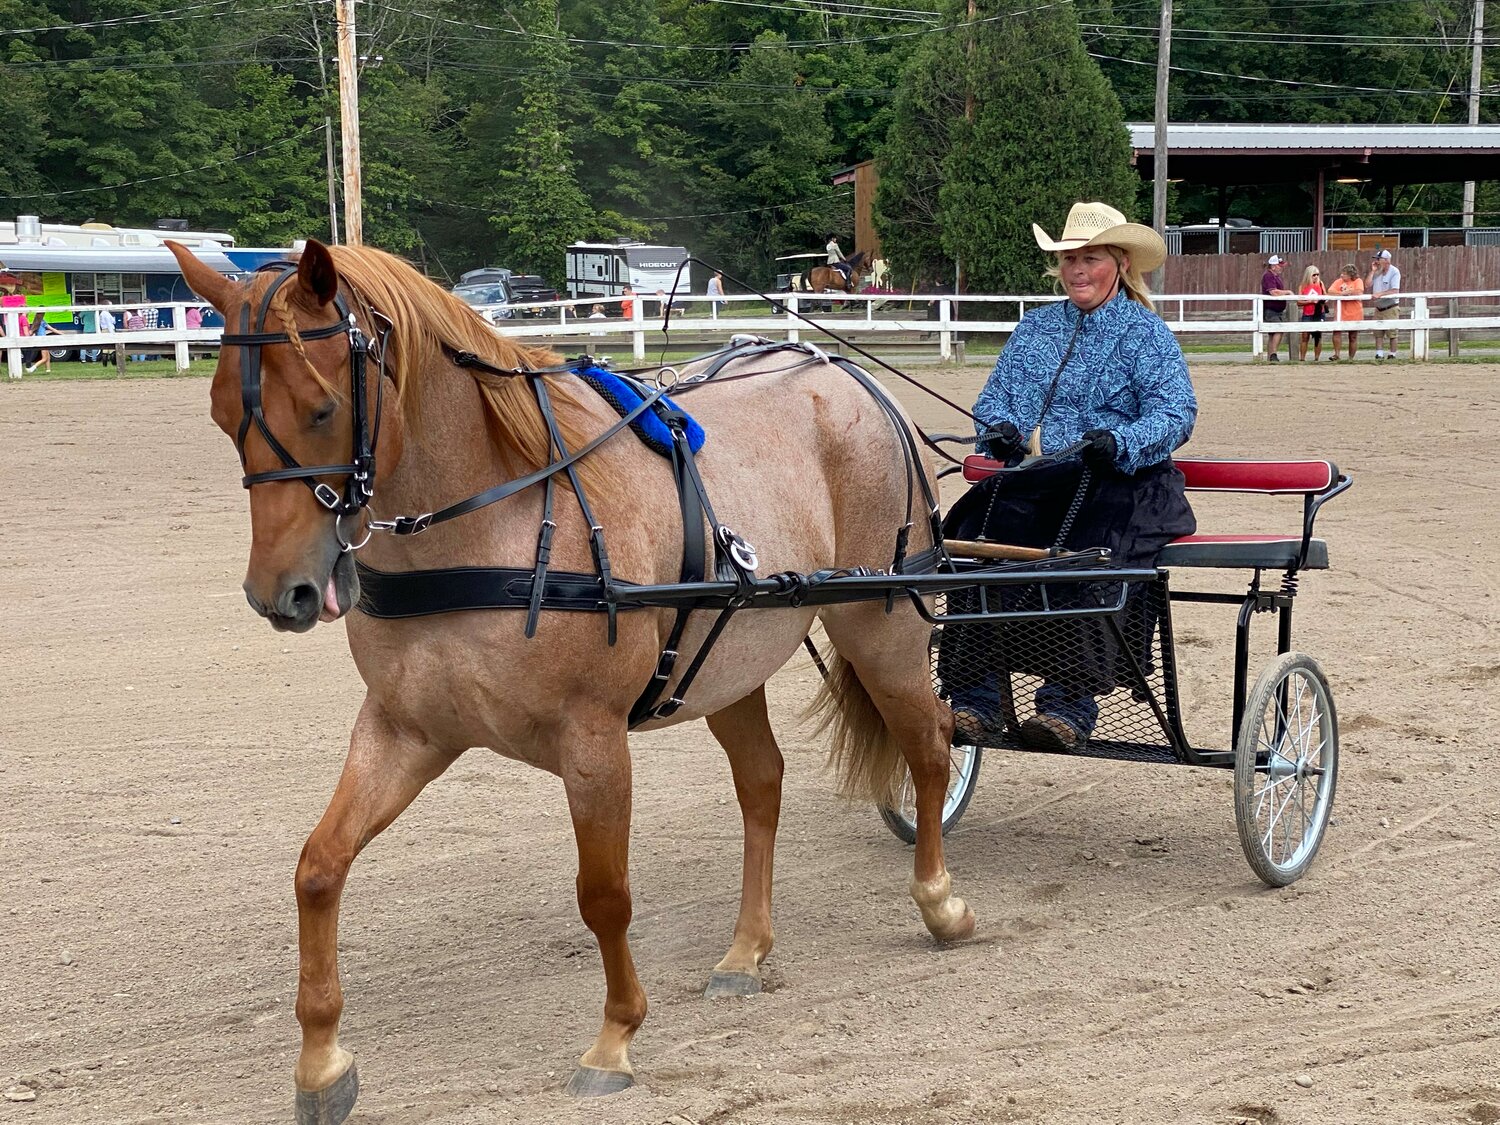 Mindy Tweedie competes in the open pleasure driving class, at the Delaware County Fairs Open Horse Show, Sunday, Aug. 13. Tweedie took home the day-end Driving Horse Grand Championship title.